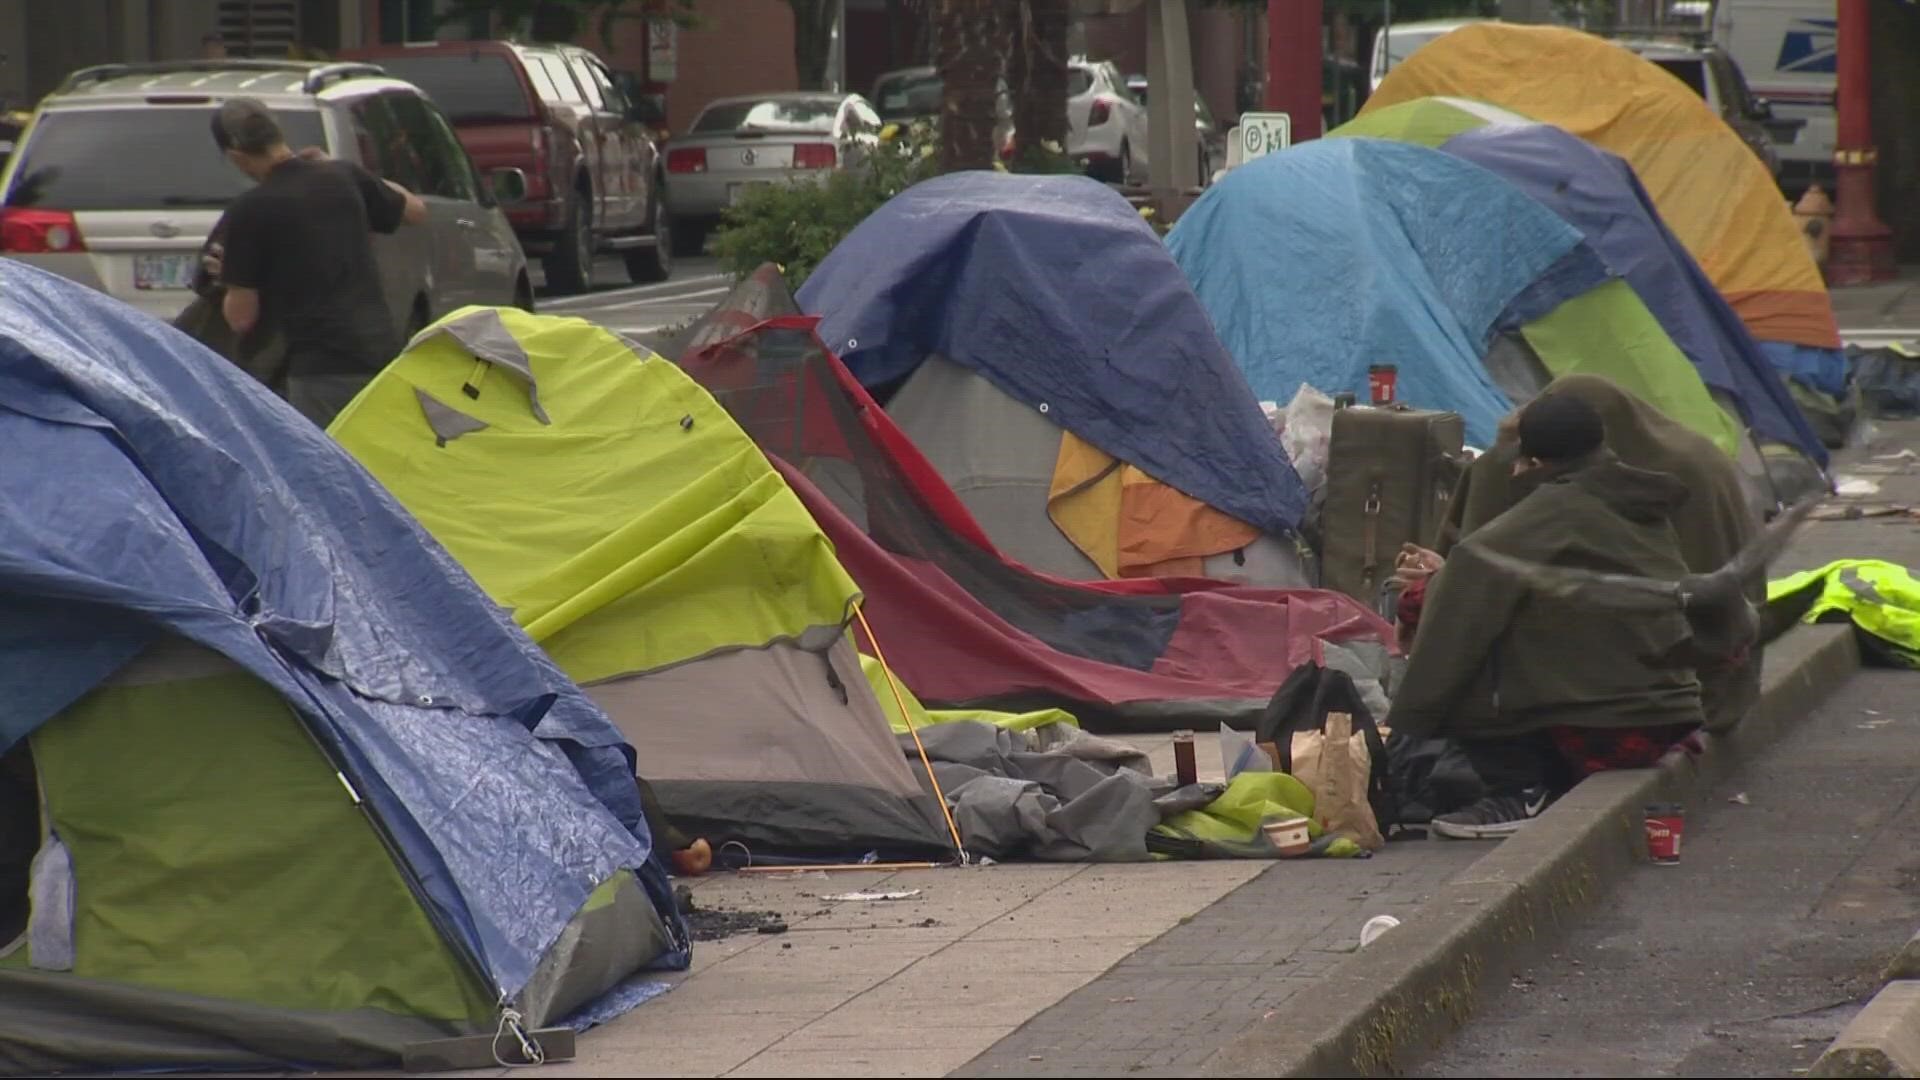 The announcement comes after a new survey found homelessness continues to be the biggest issue of concern in Portland.